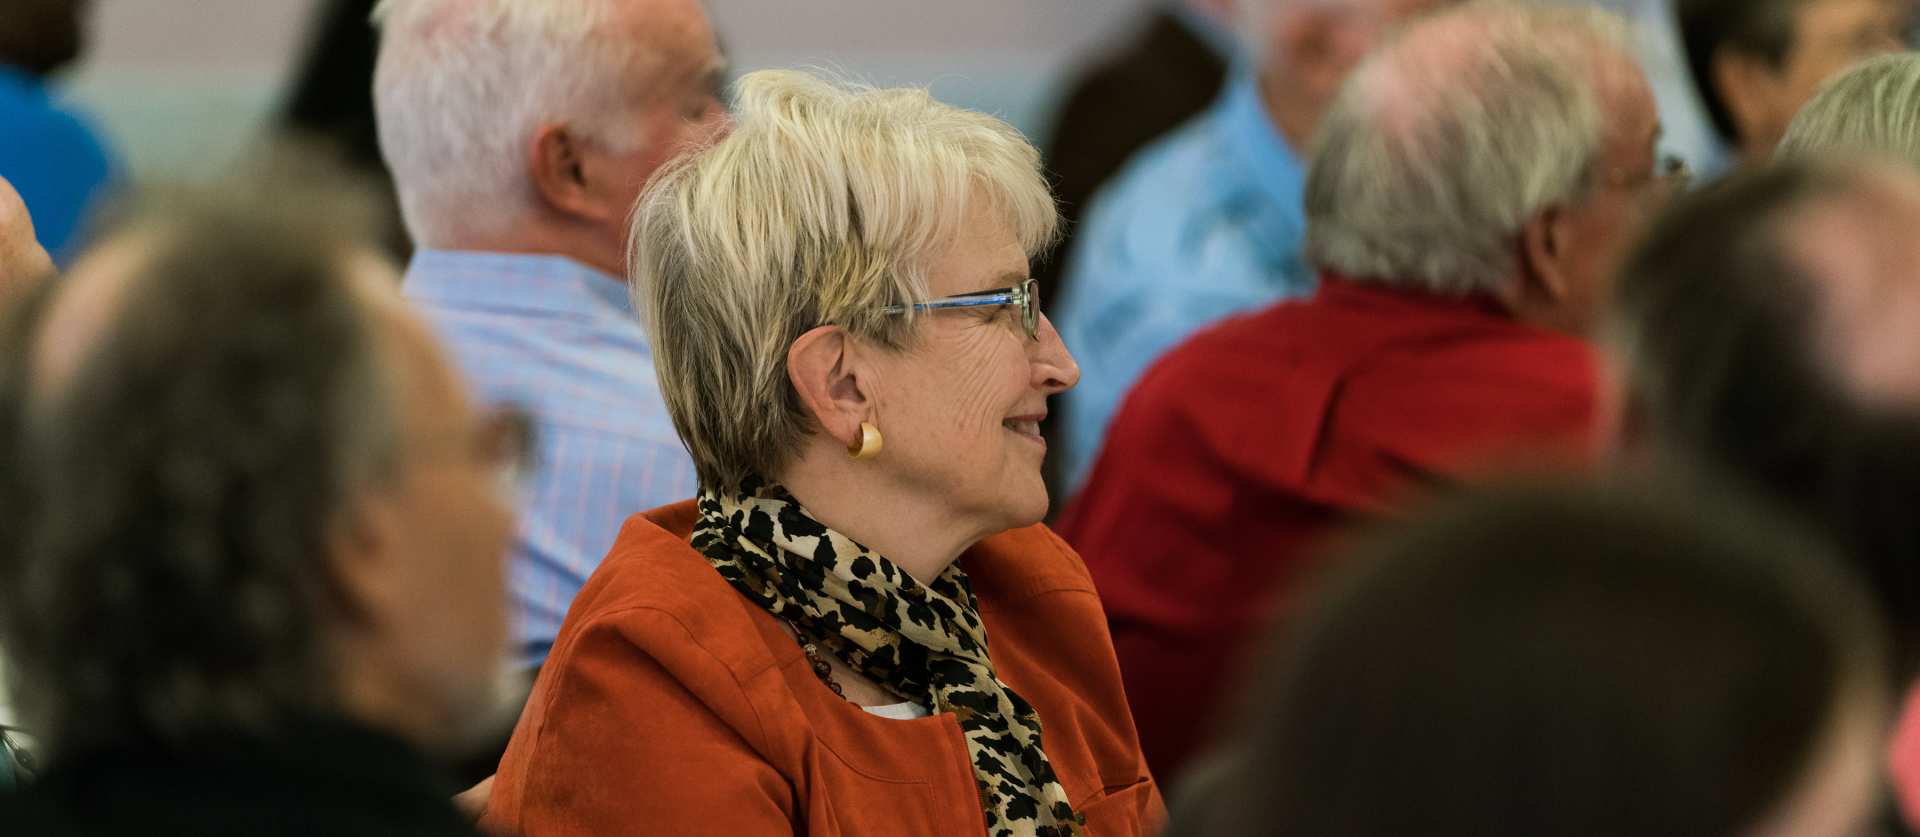 A member listening during an All-Church event in Mary Norton Hall